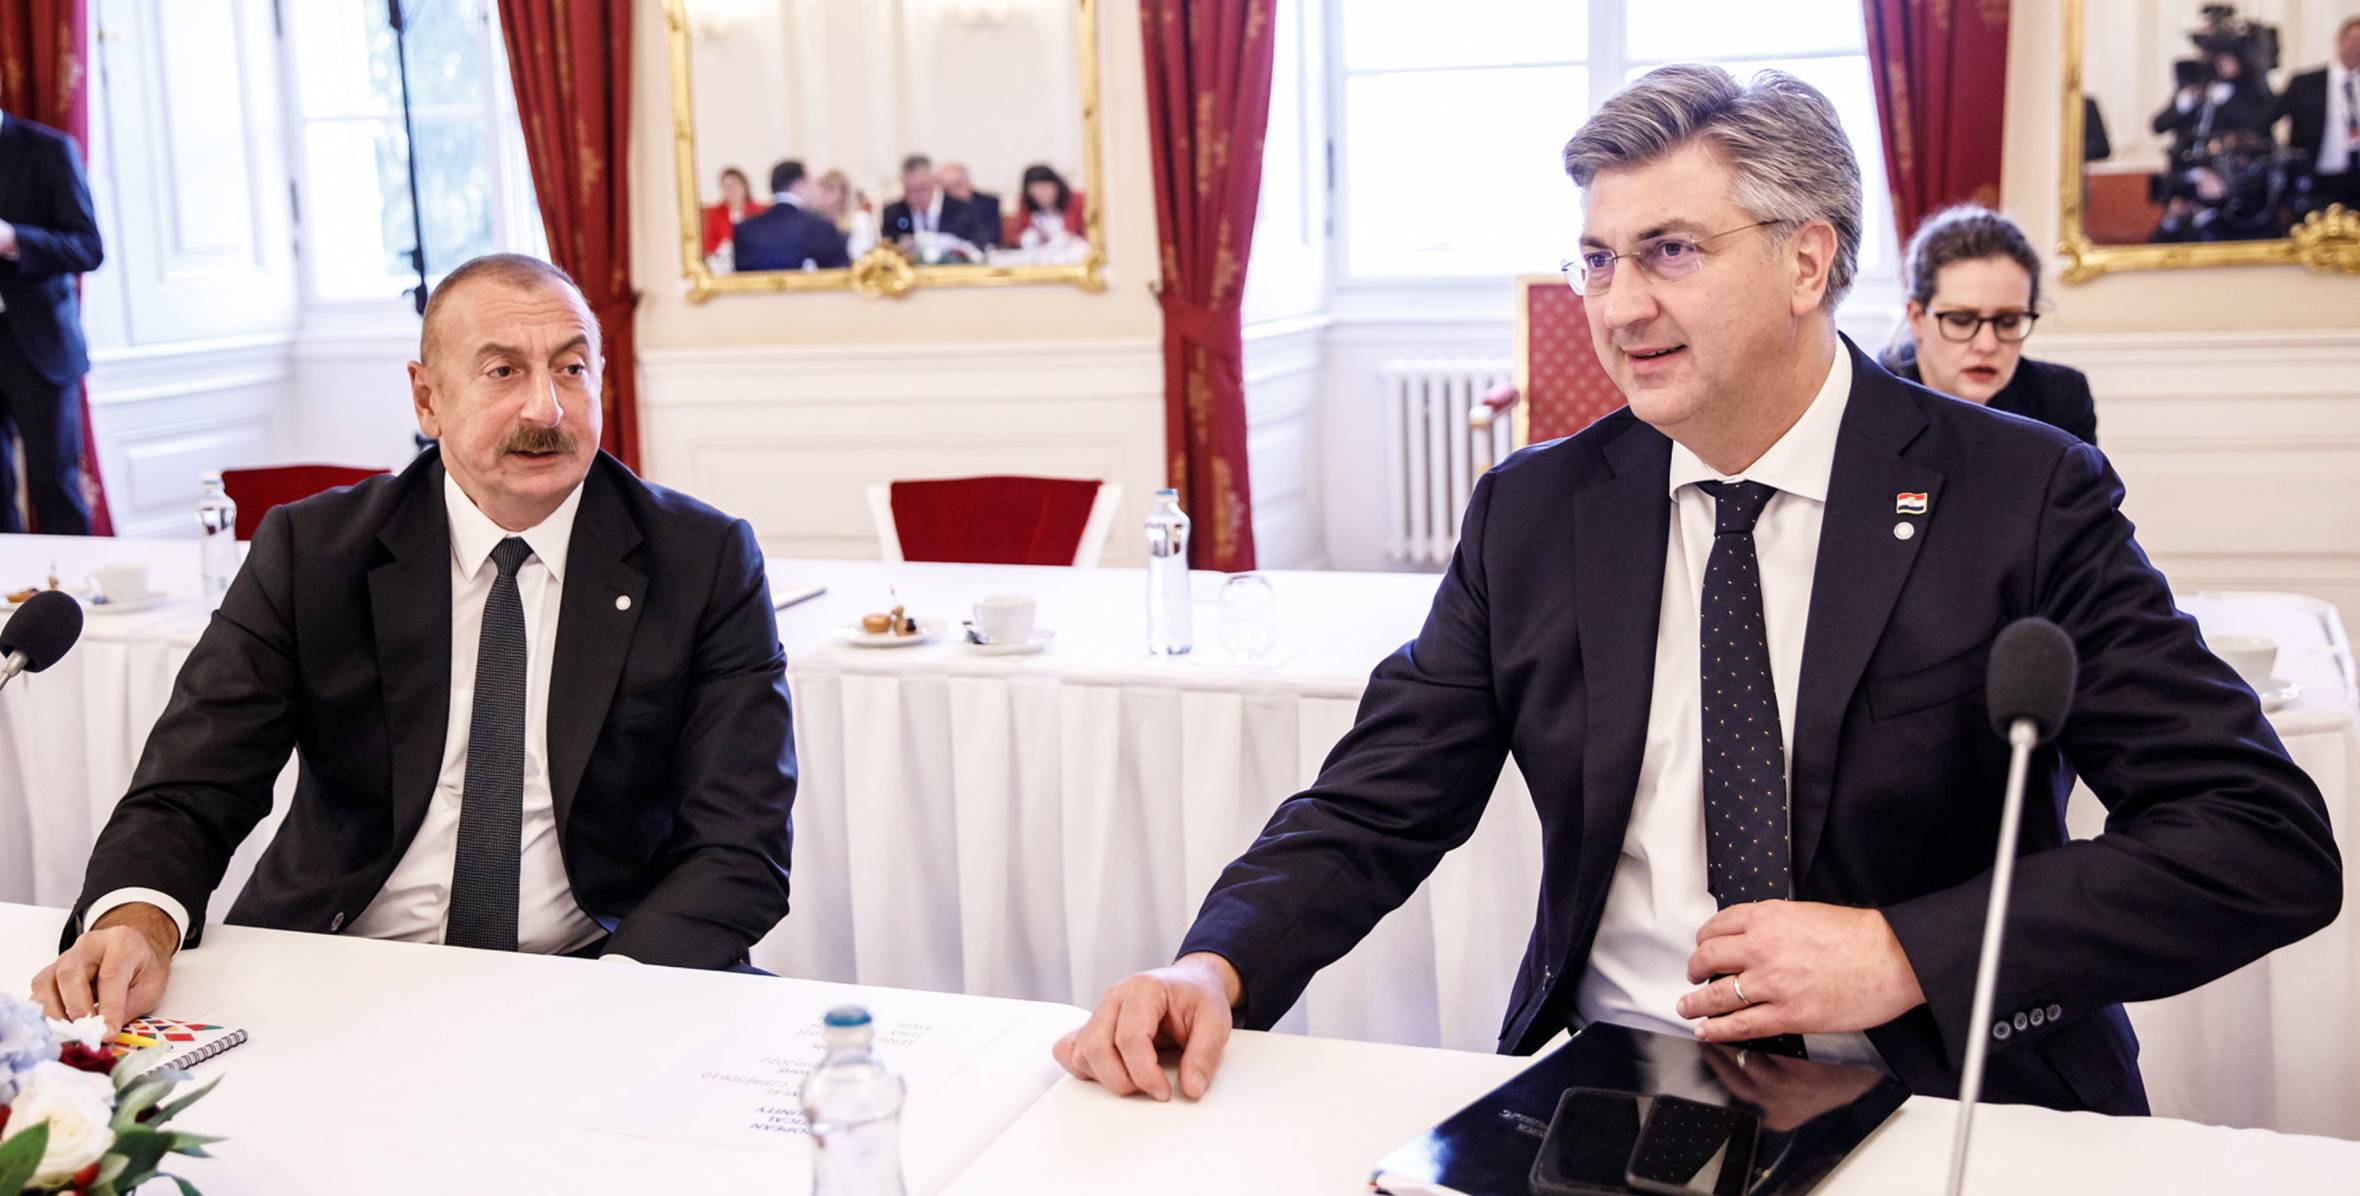 Ilham Aliyev took part in roundtable discussions on “Peace and Security on European continent” in Prague